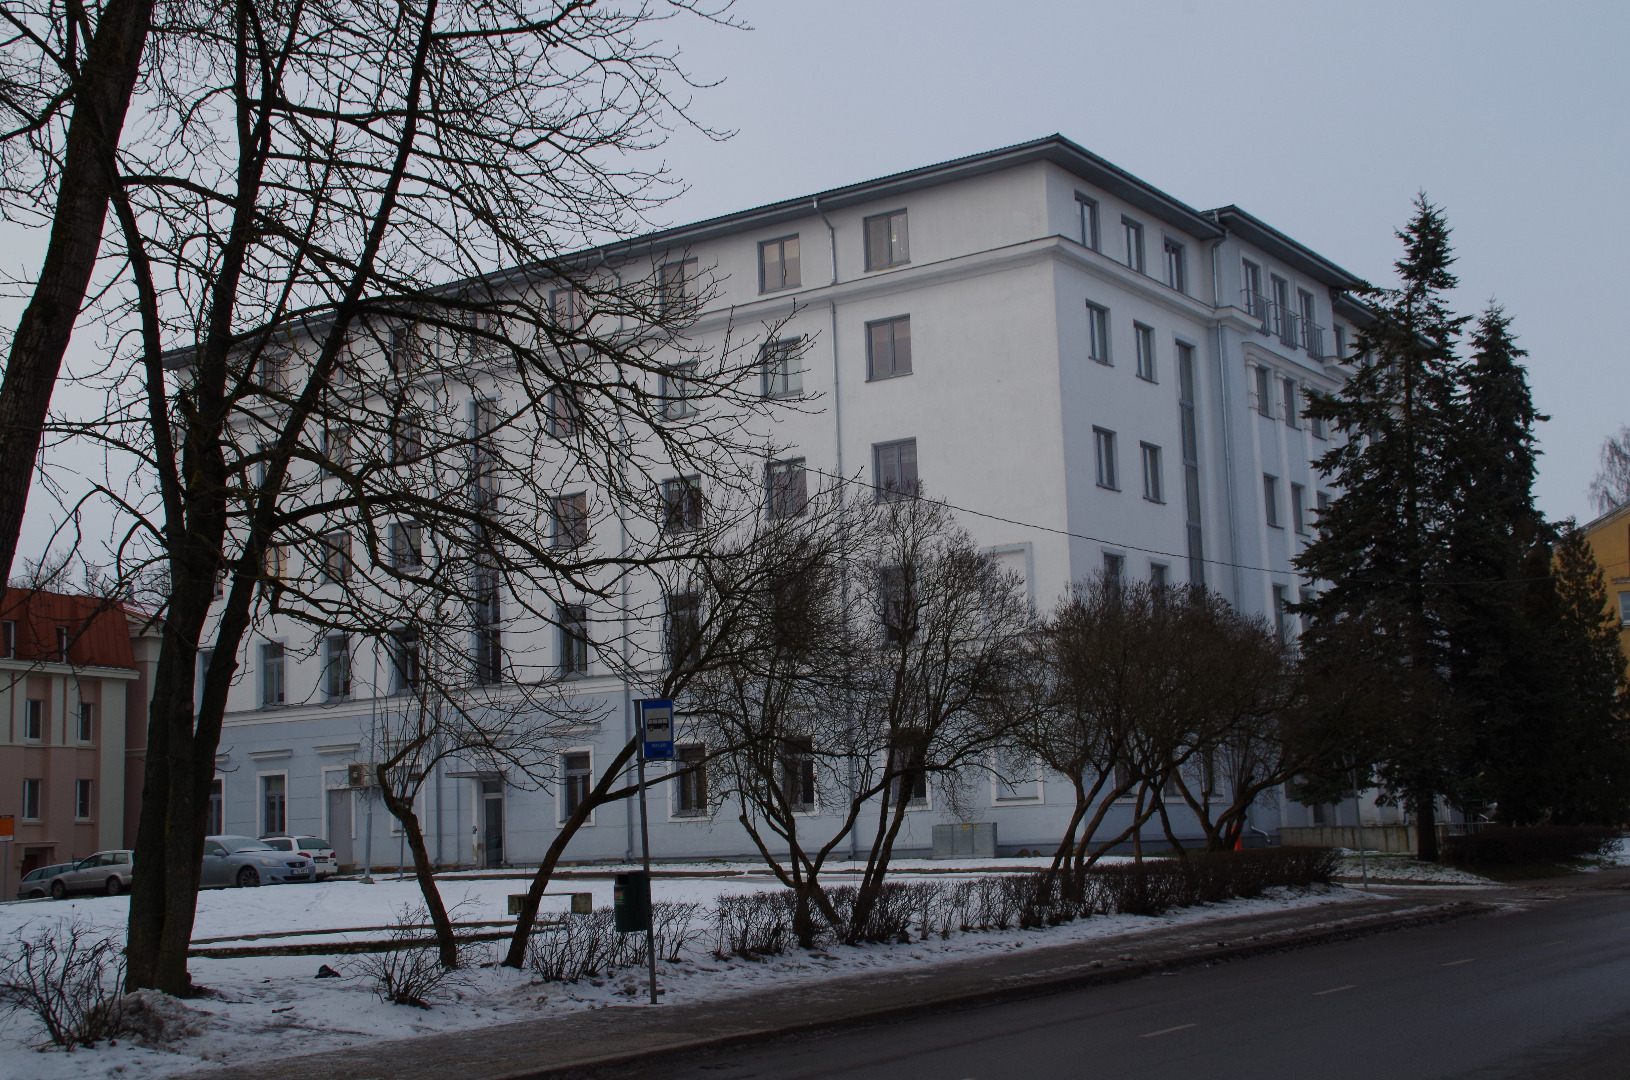 At the corner of the joint venue of the University of Tartu, Vanemuise and Pälson t. rephoto